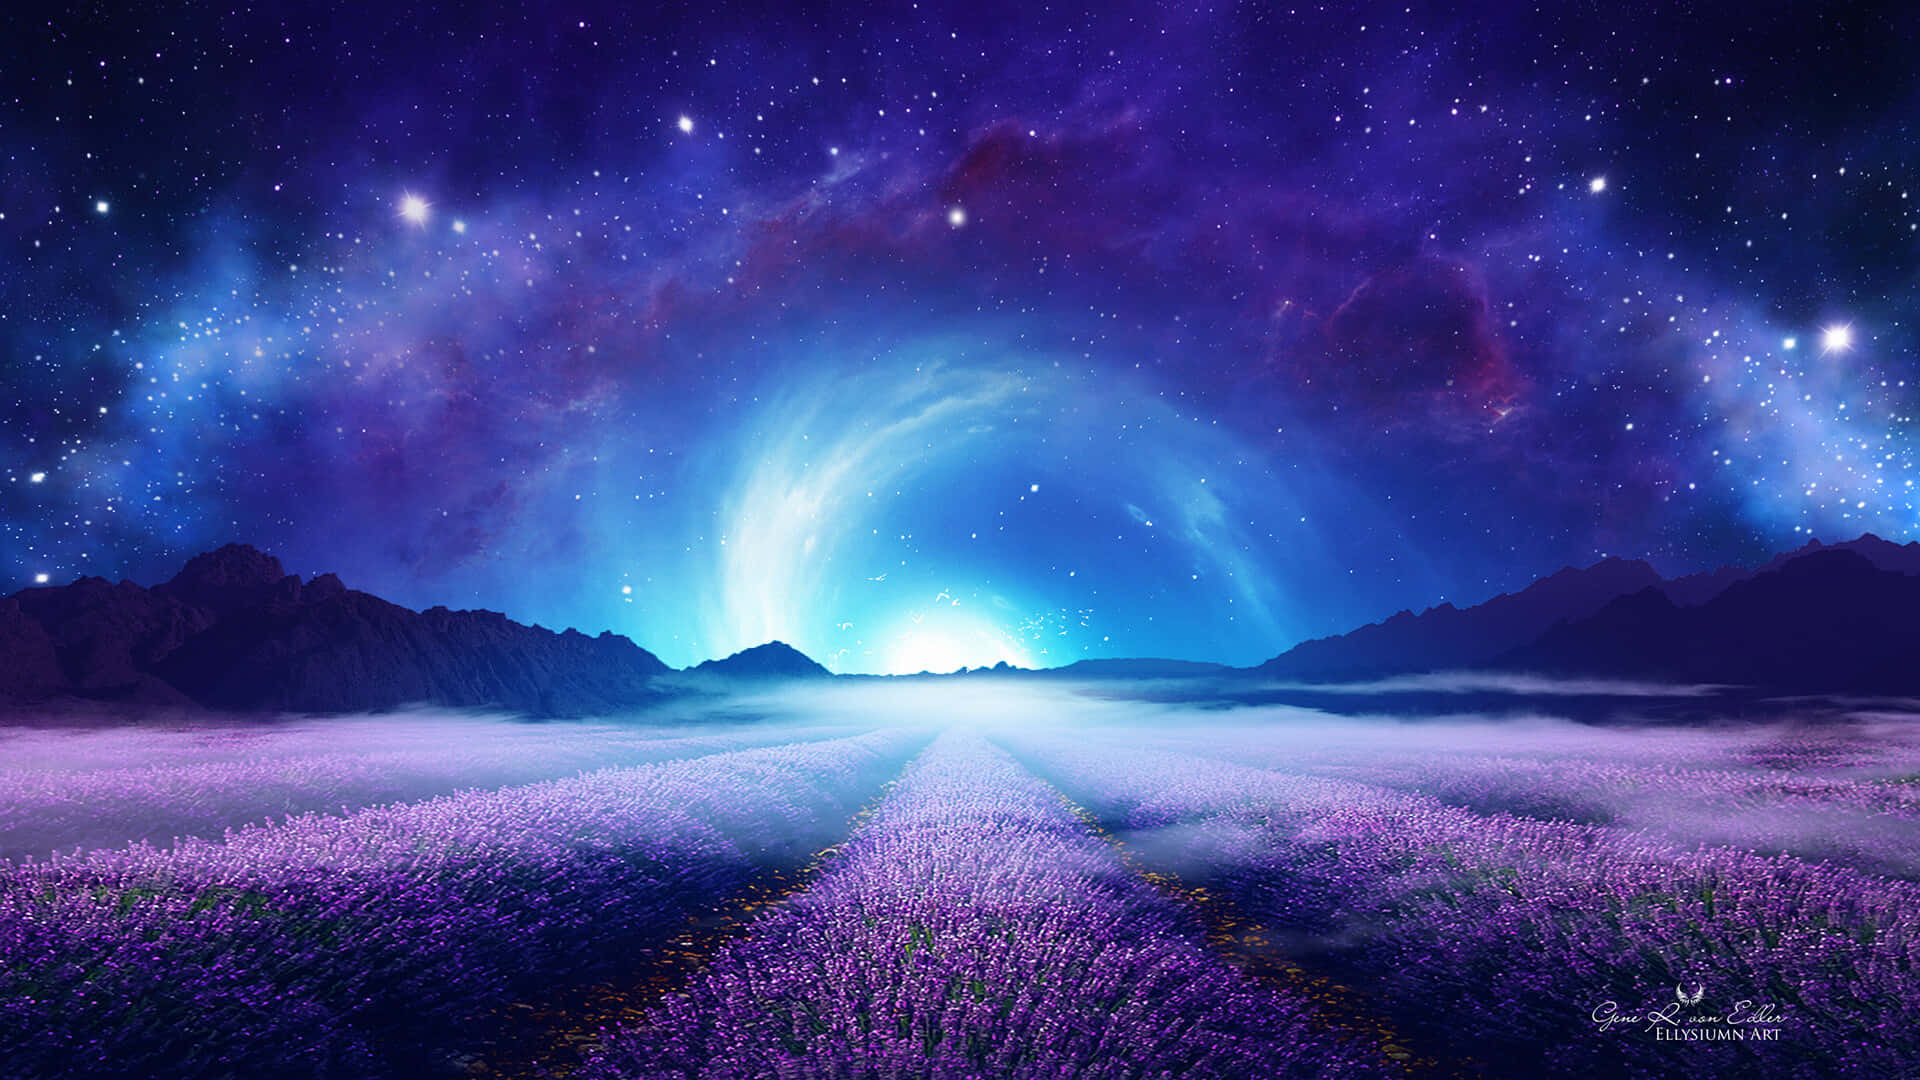 Take a moment to enjoy the beauty of the lavender fields. Wallpaper